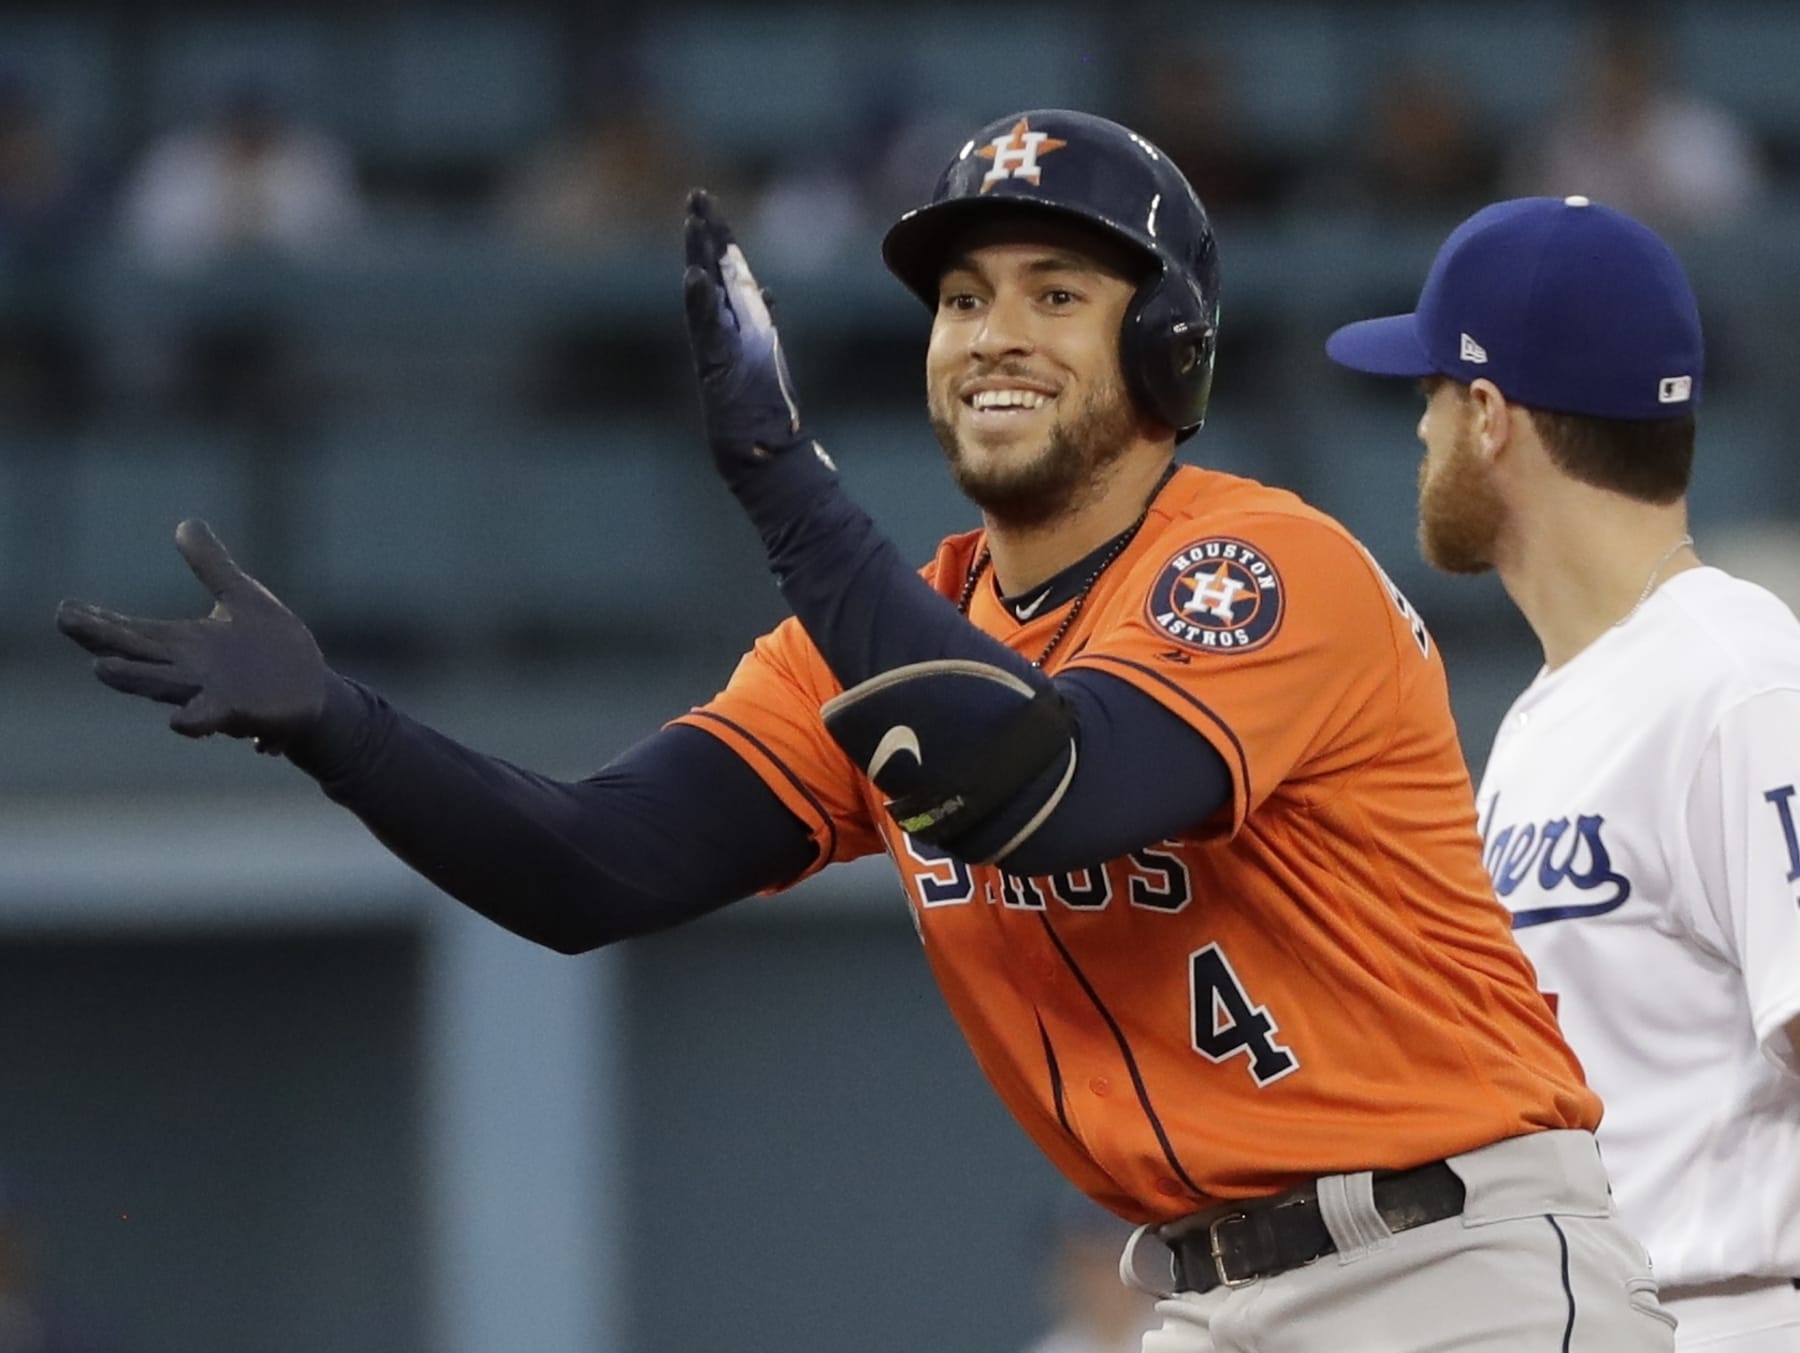 George Springer continues rampage for Astros